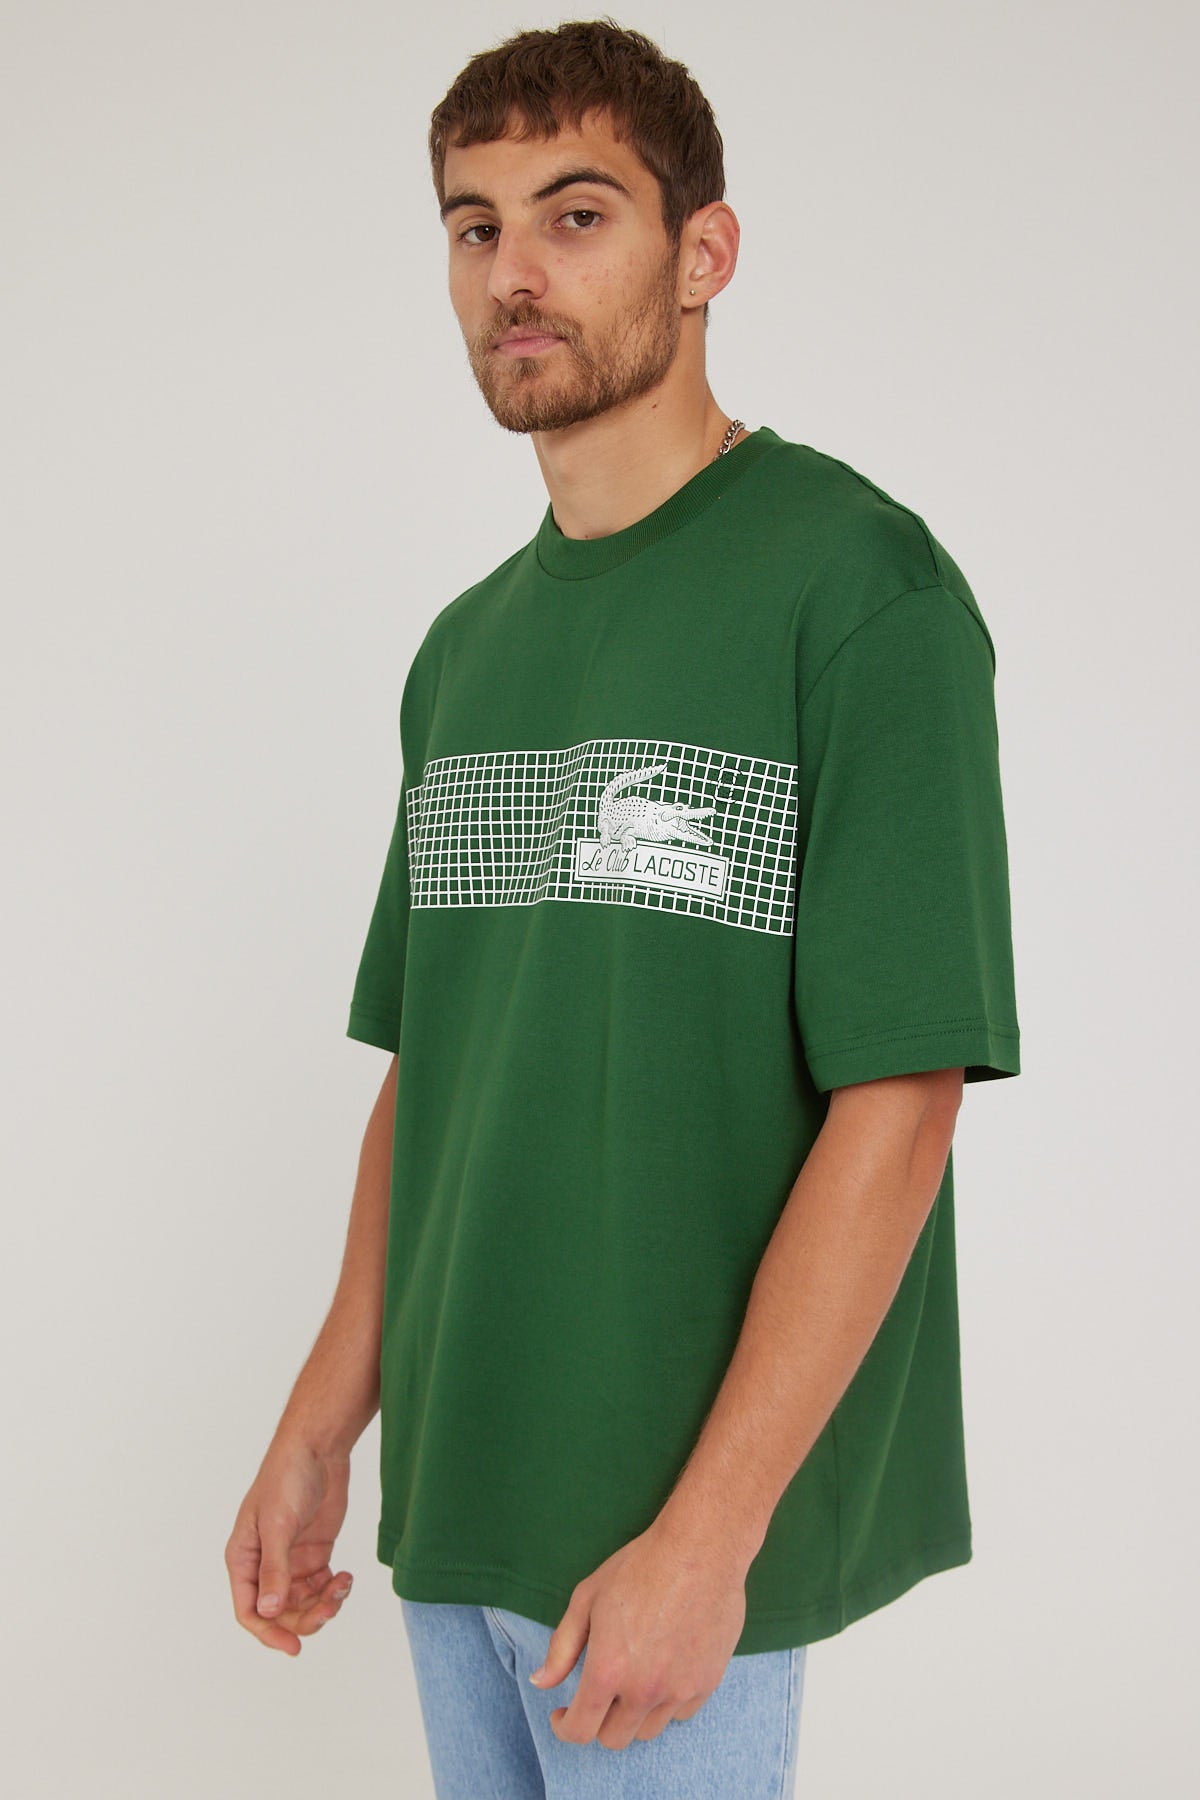 Lacoste Neo Heritage LE Club Tee Green